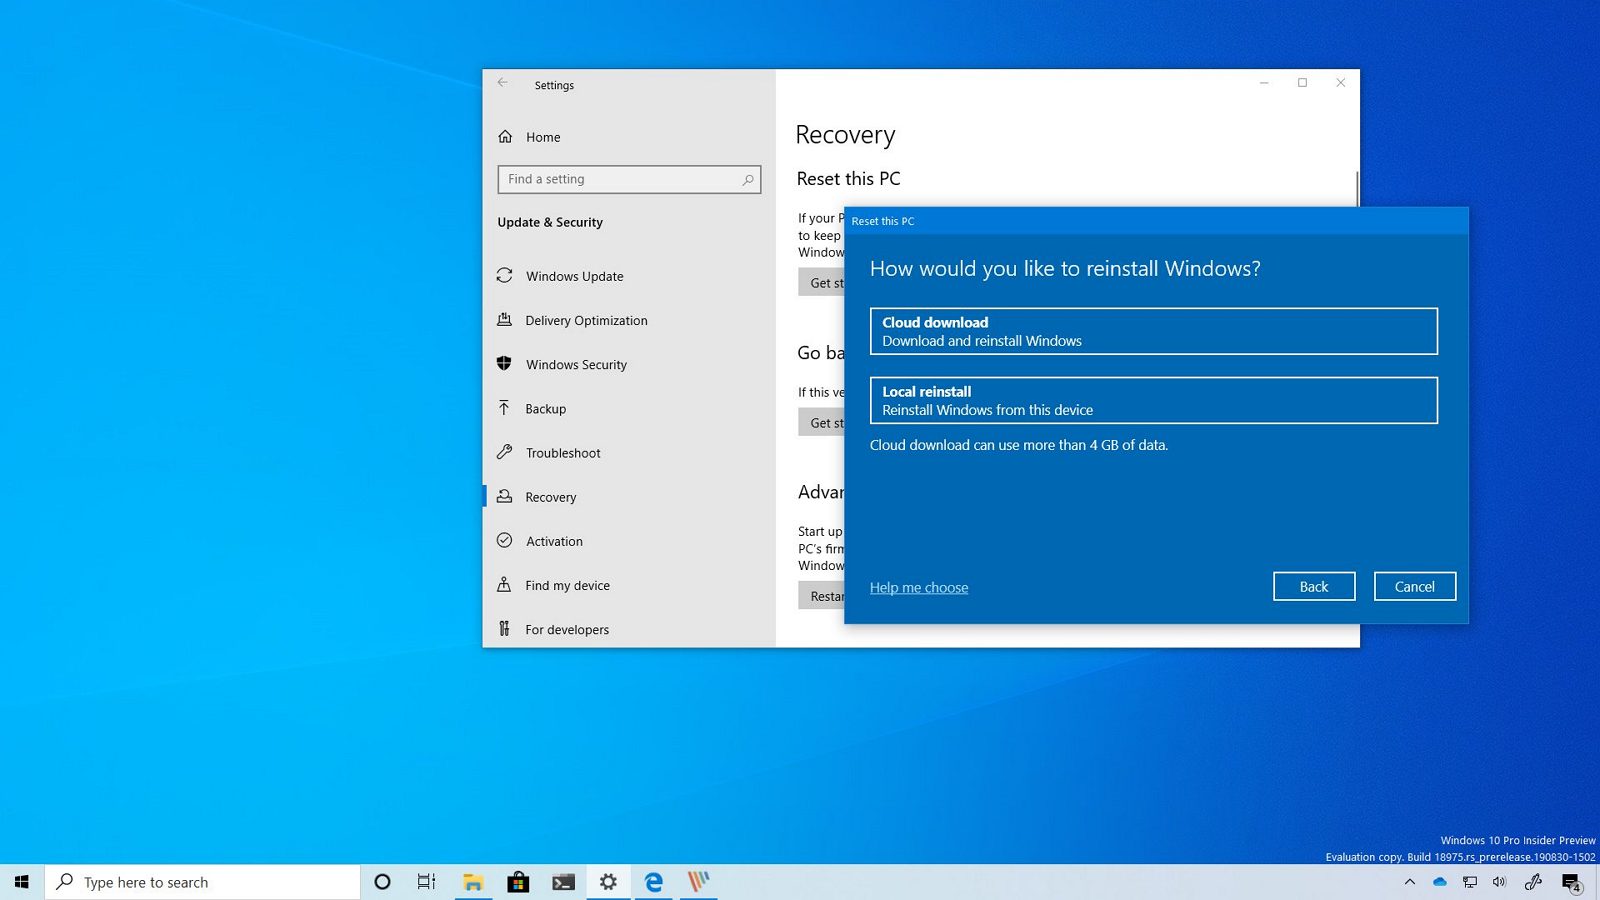 Windows 10 build 18975 with Cloud Download